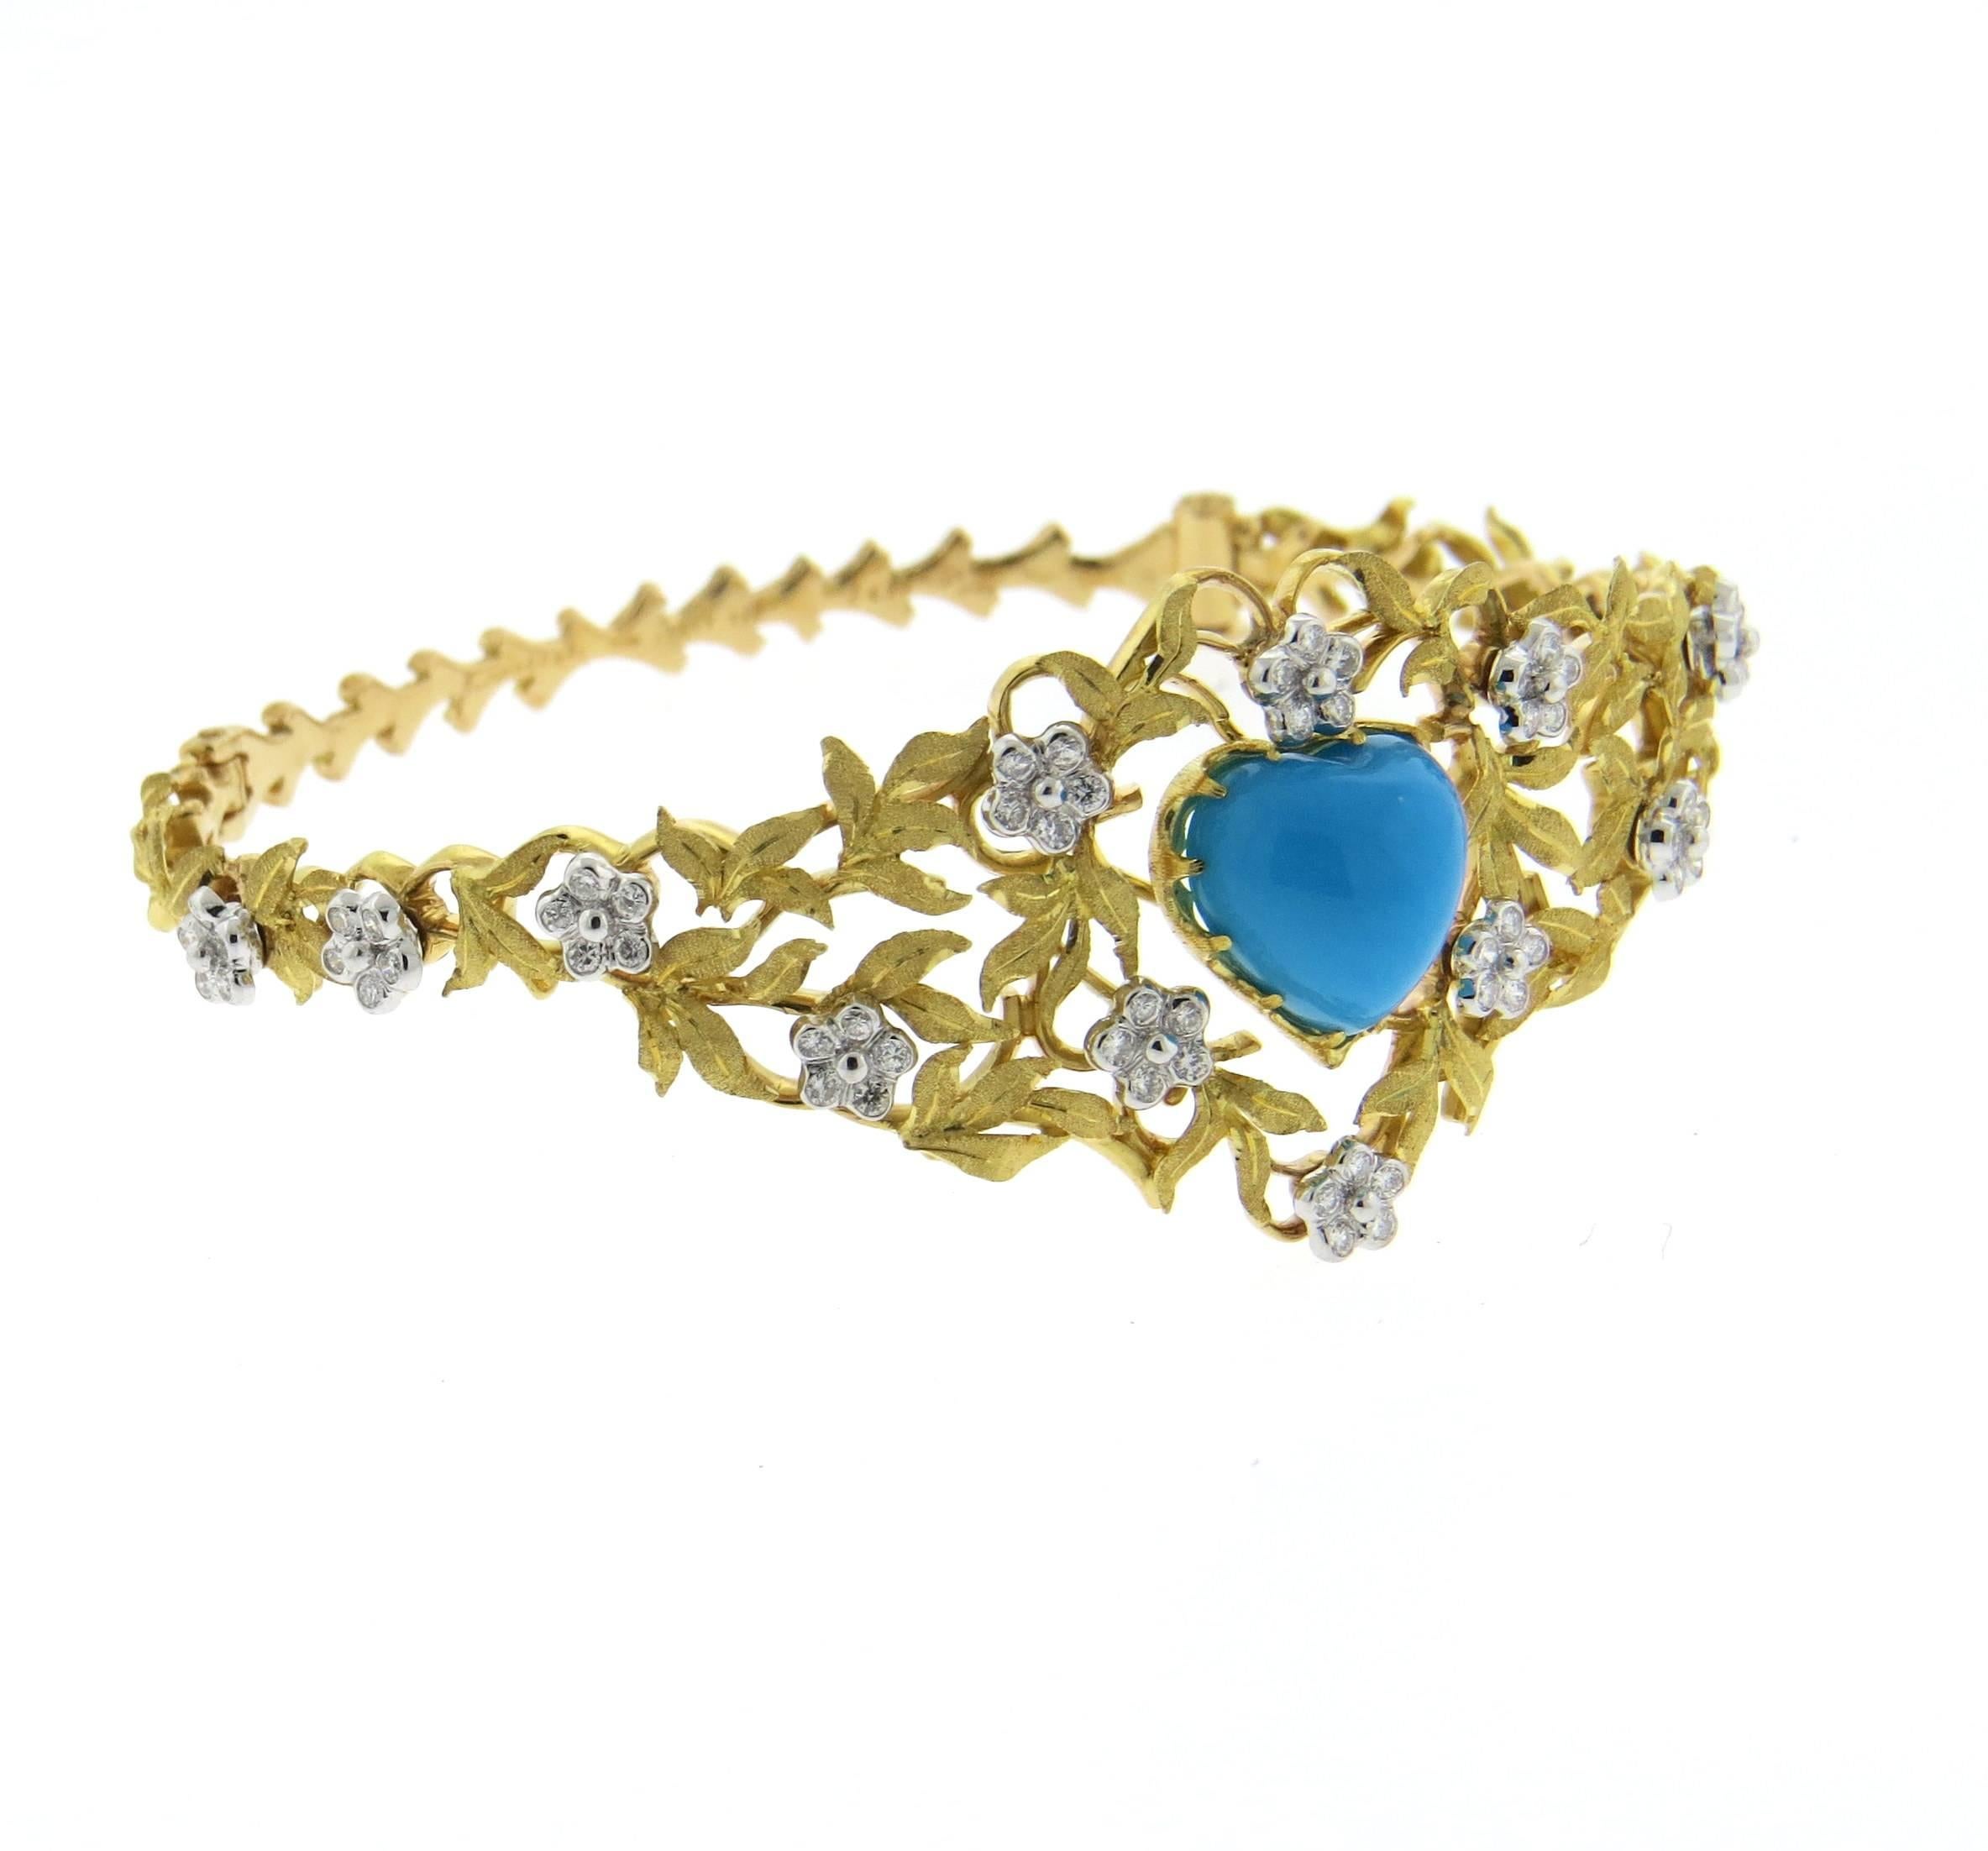 Beautiful 18k gold bangle bracelet, adorned with diamonds and heart shape turquoise in the center. Bracelet will comfortably fit up to 7